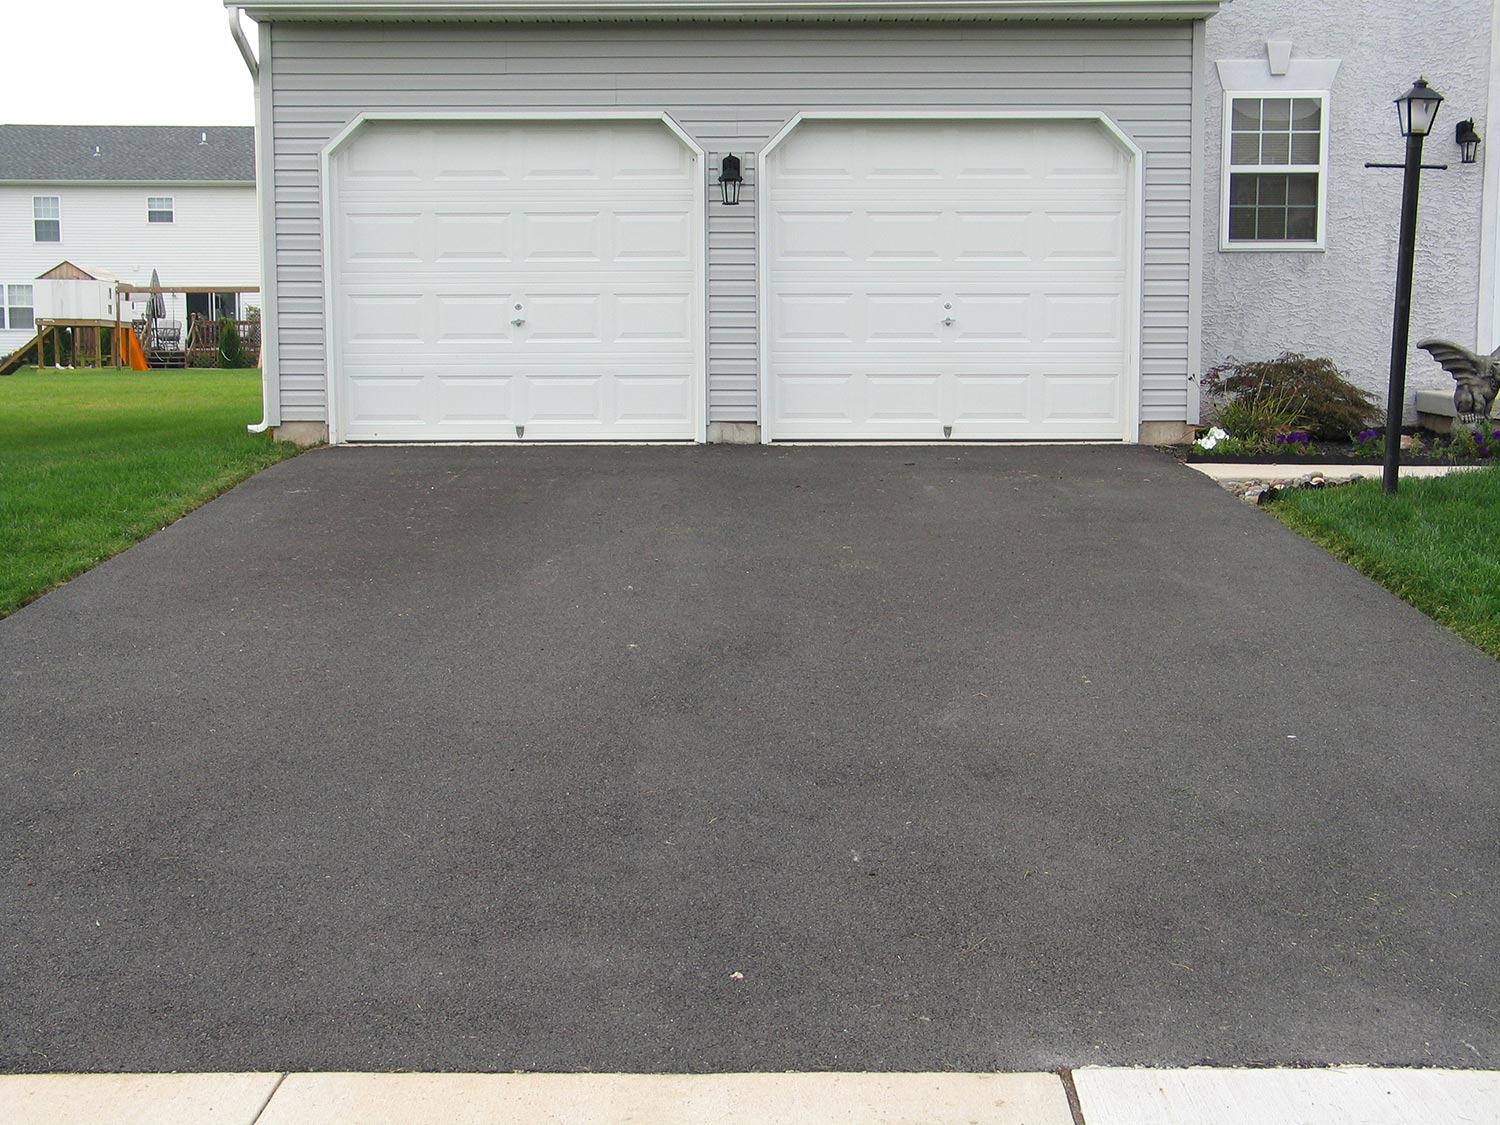 Double garage with white doors at the end of a driveway